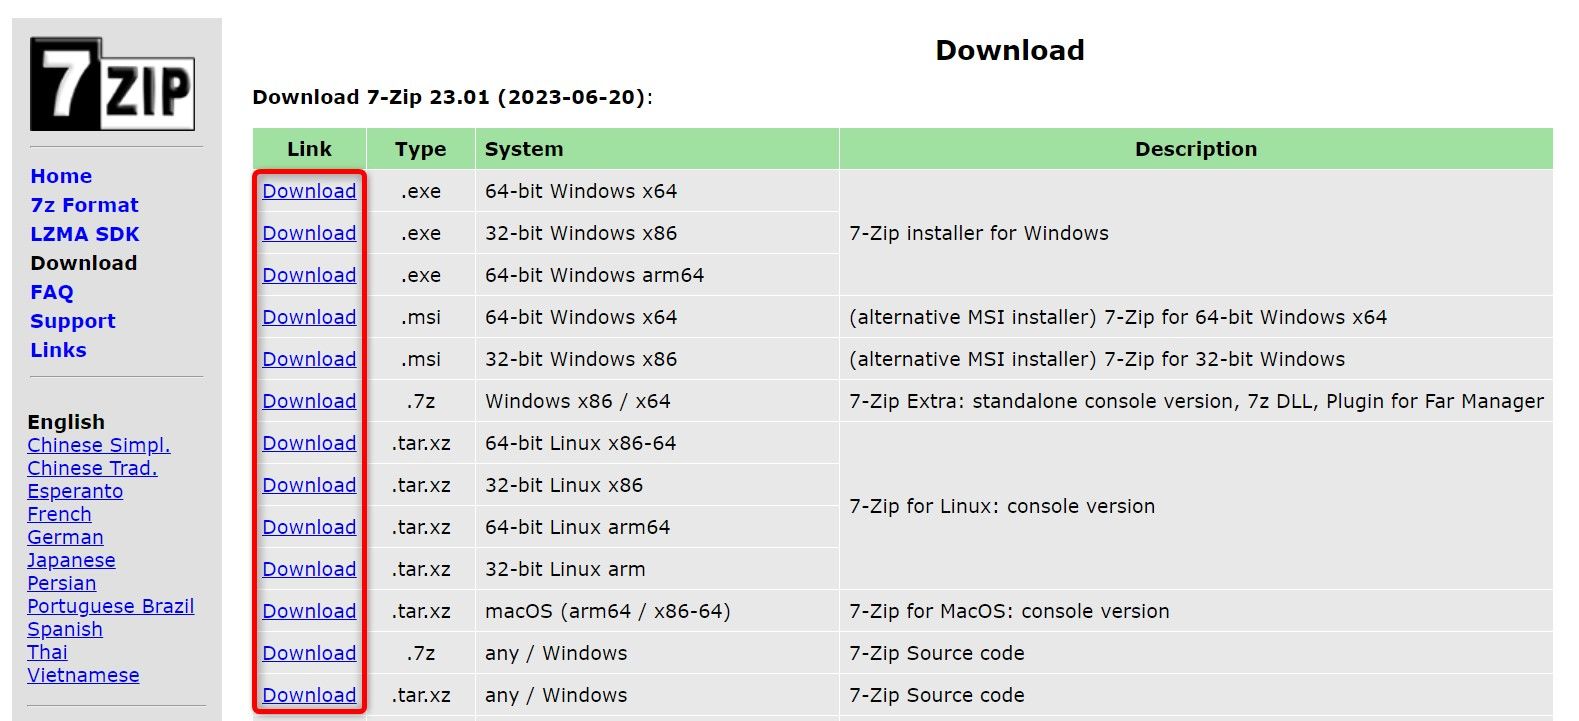 'Download' options highlighted on the 7-Zip website.